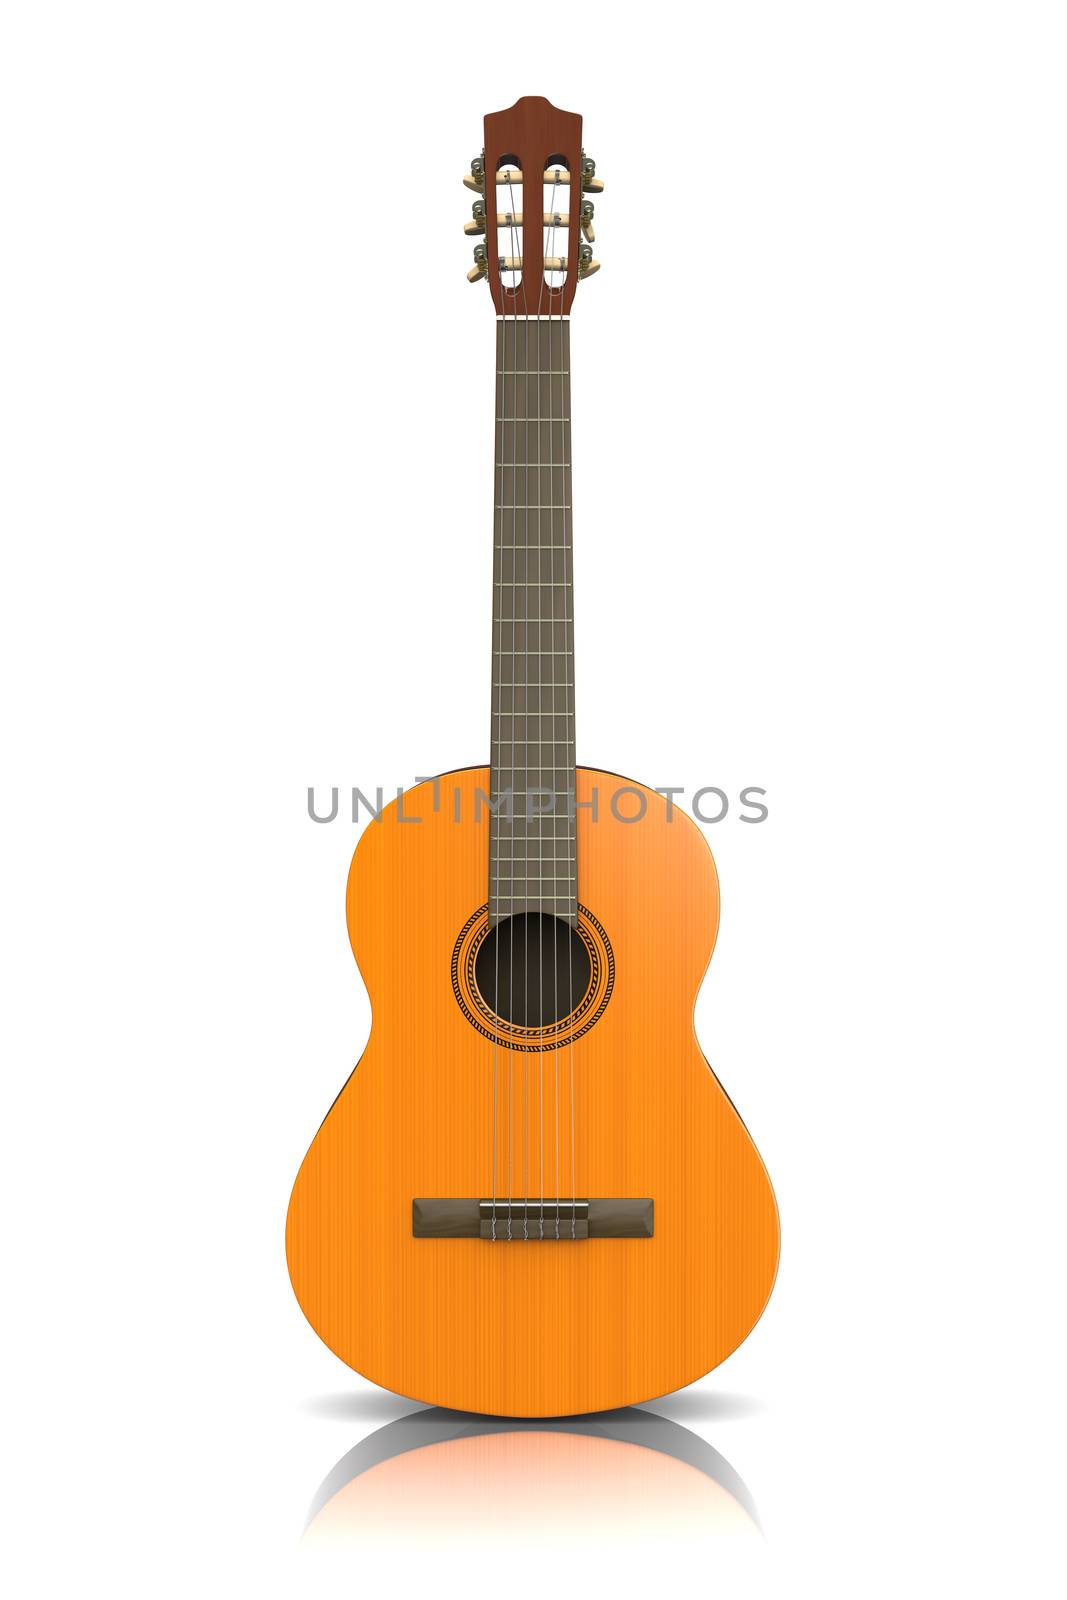 Classical Guitar on White Background 3D Photorealistic Illustration